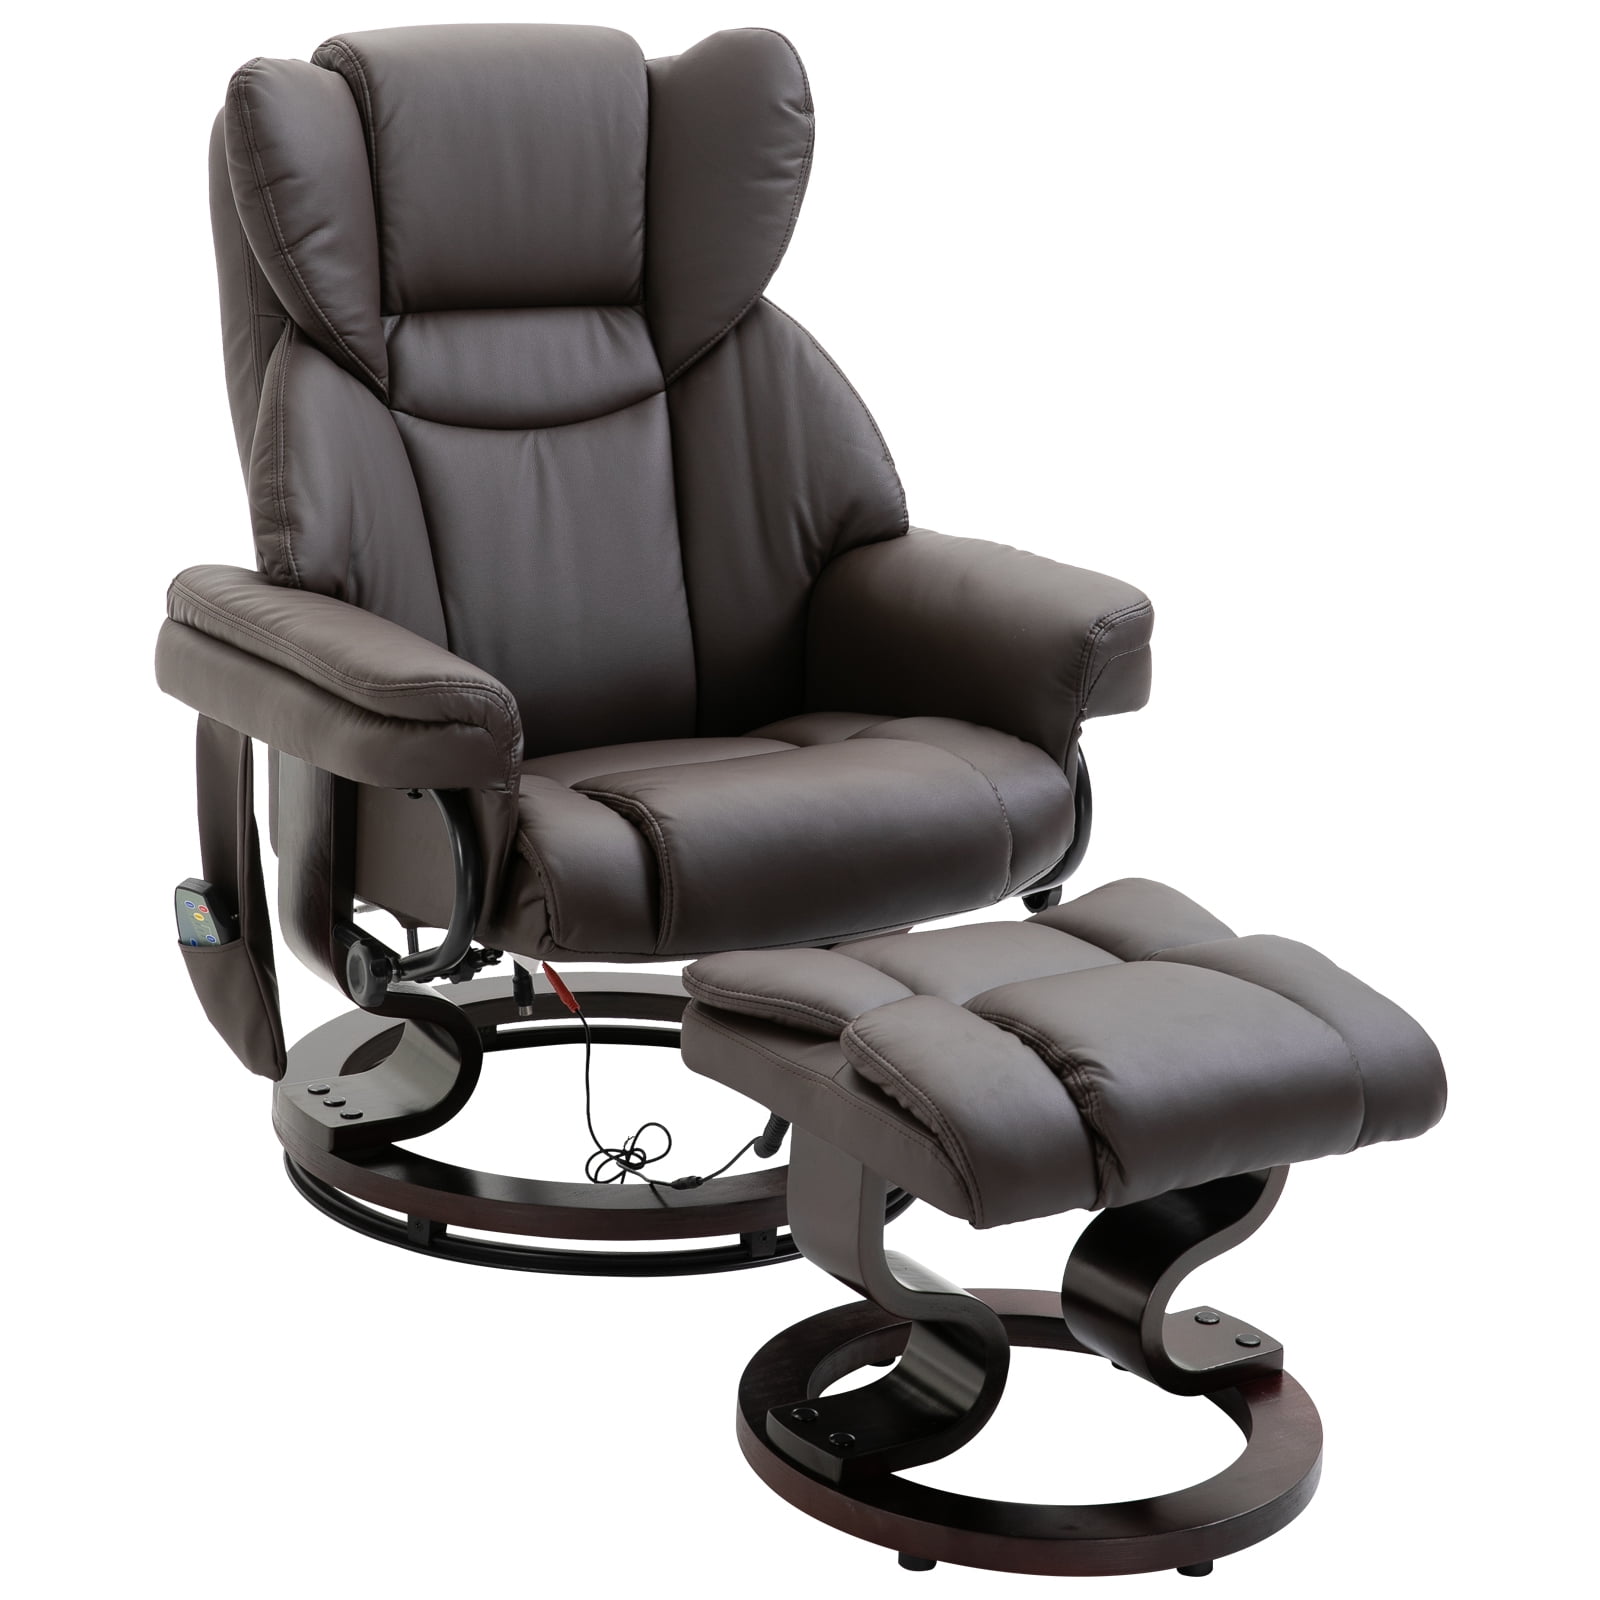 Homcom Massage Recliner Chair With, Recliner Leather Chairs